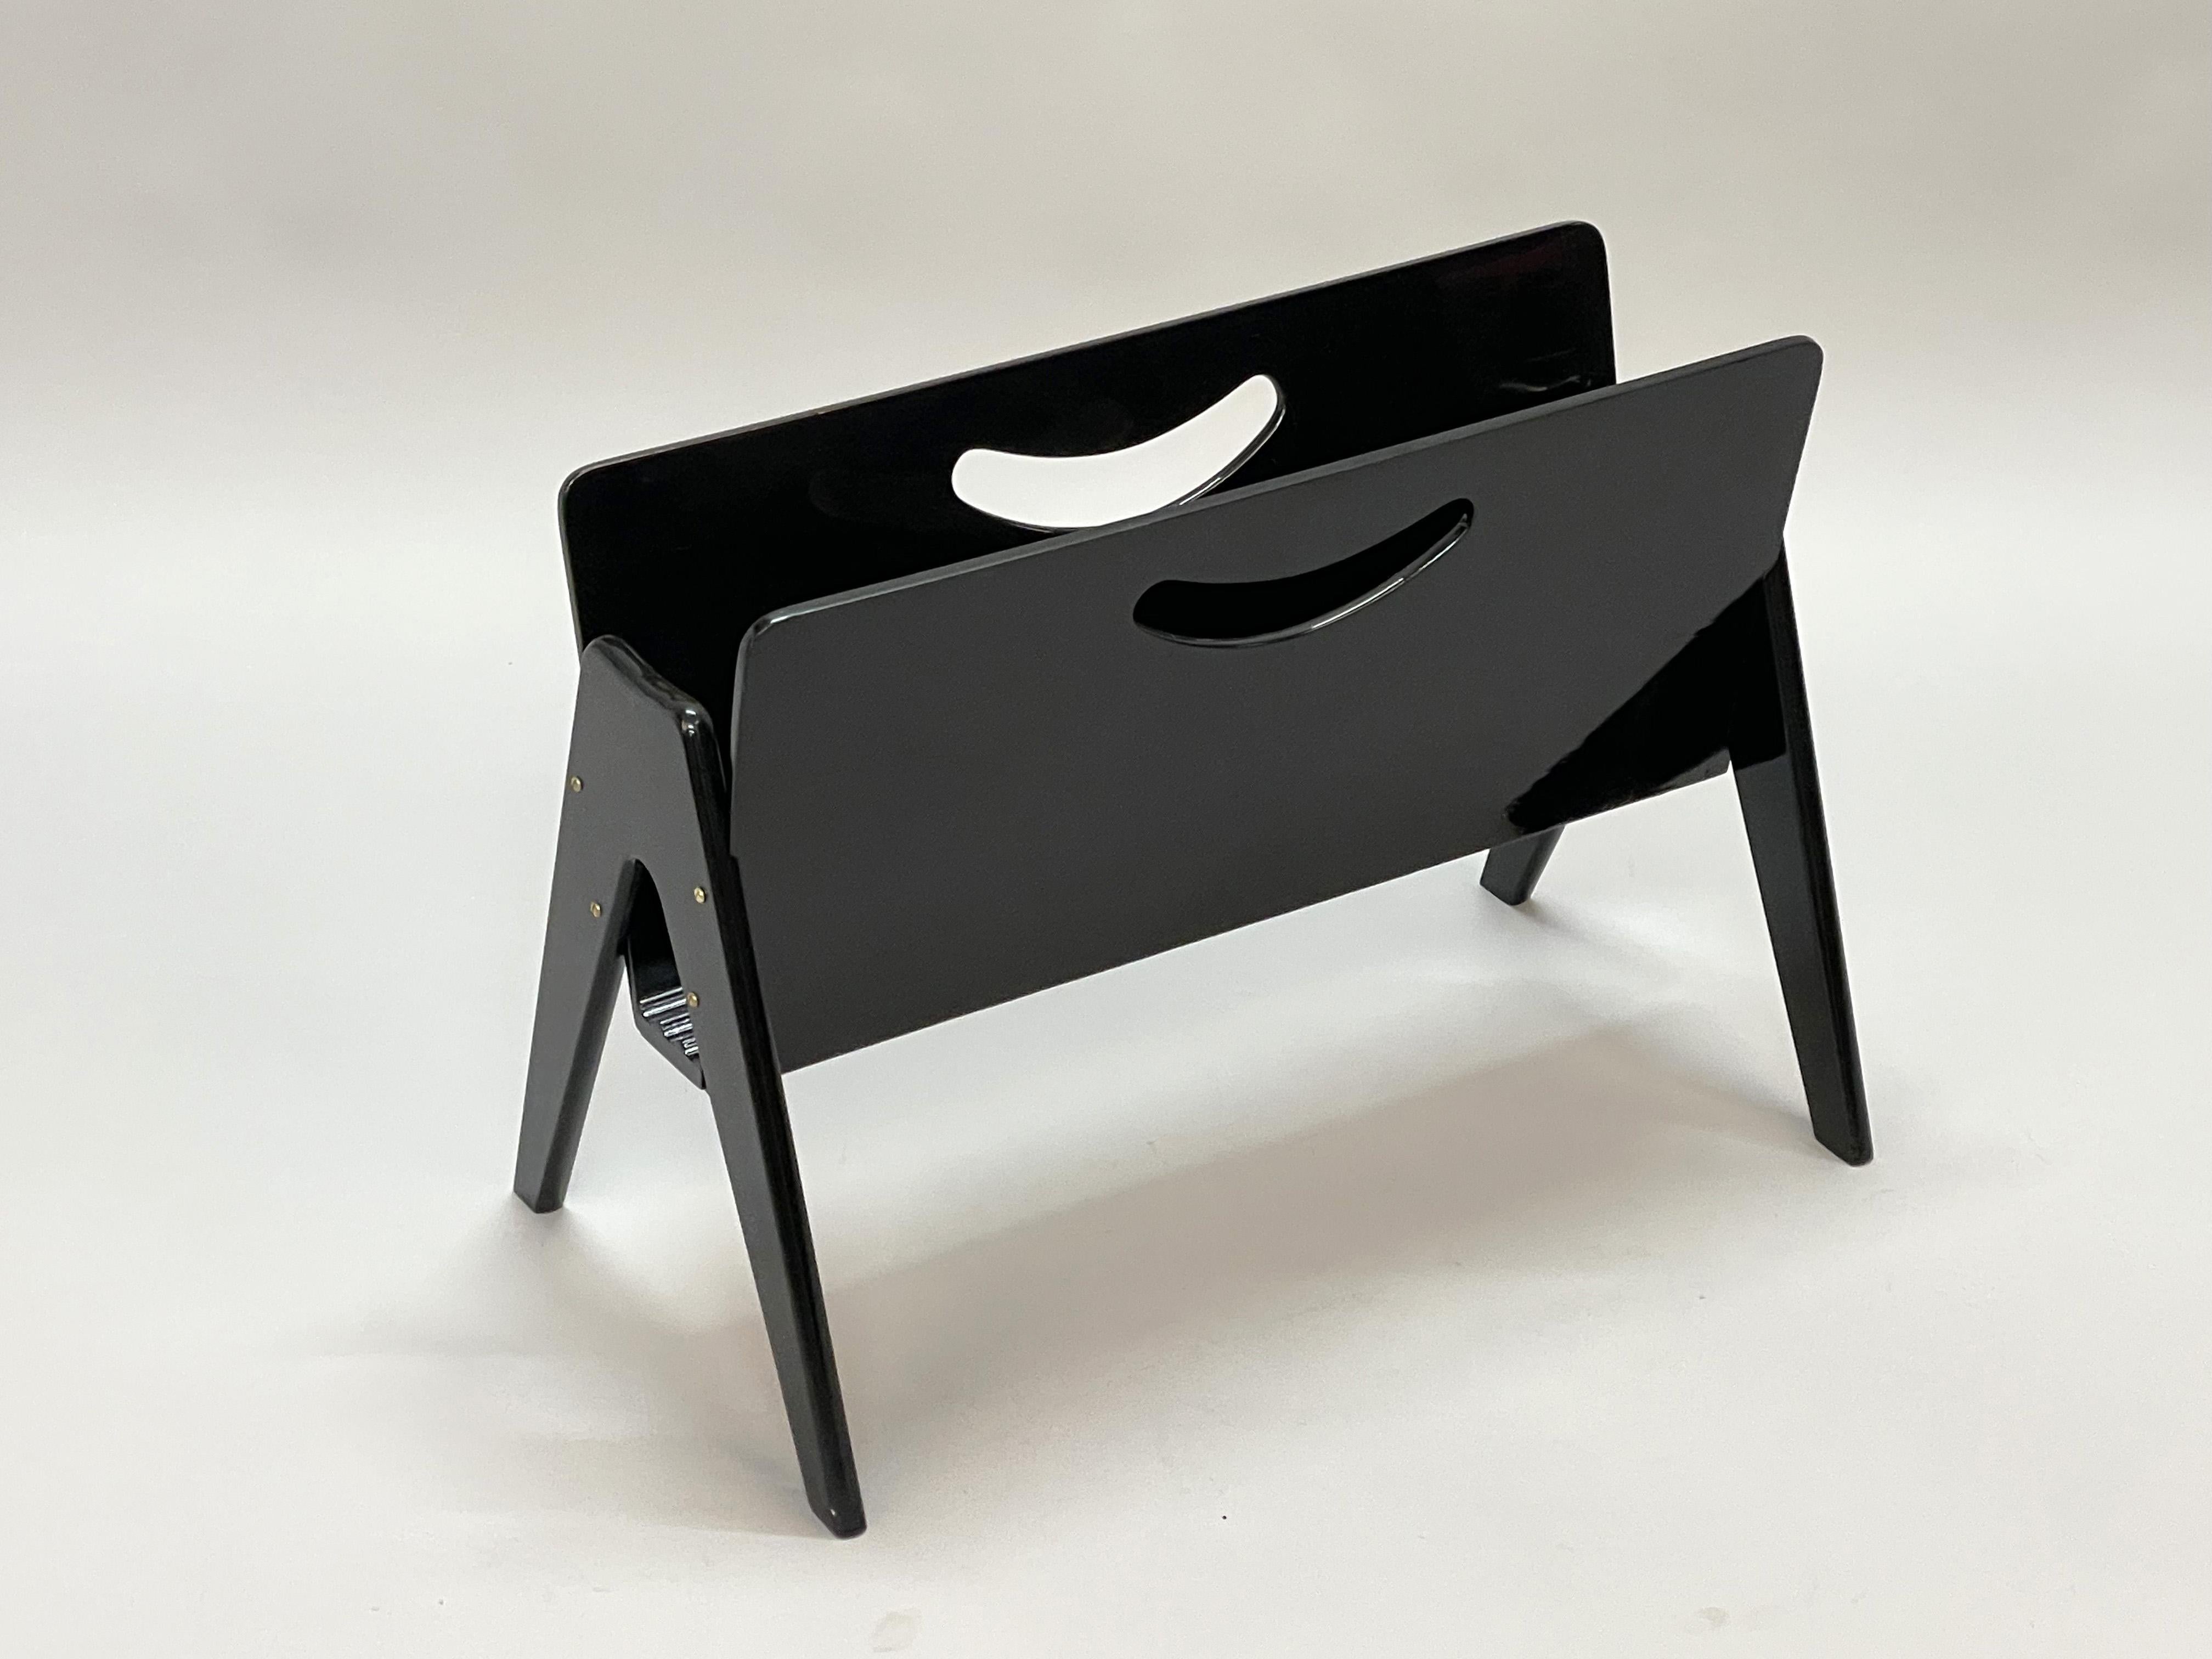 Wonderful mid-century black lacquered beech wood magazine rack. It was designed by Cesare Lacca produced in Milan, Italy in the 1950s.

It is both elegant and functional, as black lacquered wood blends seamlessly creating a striking mid-century